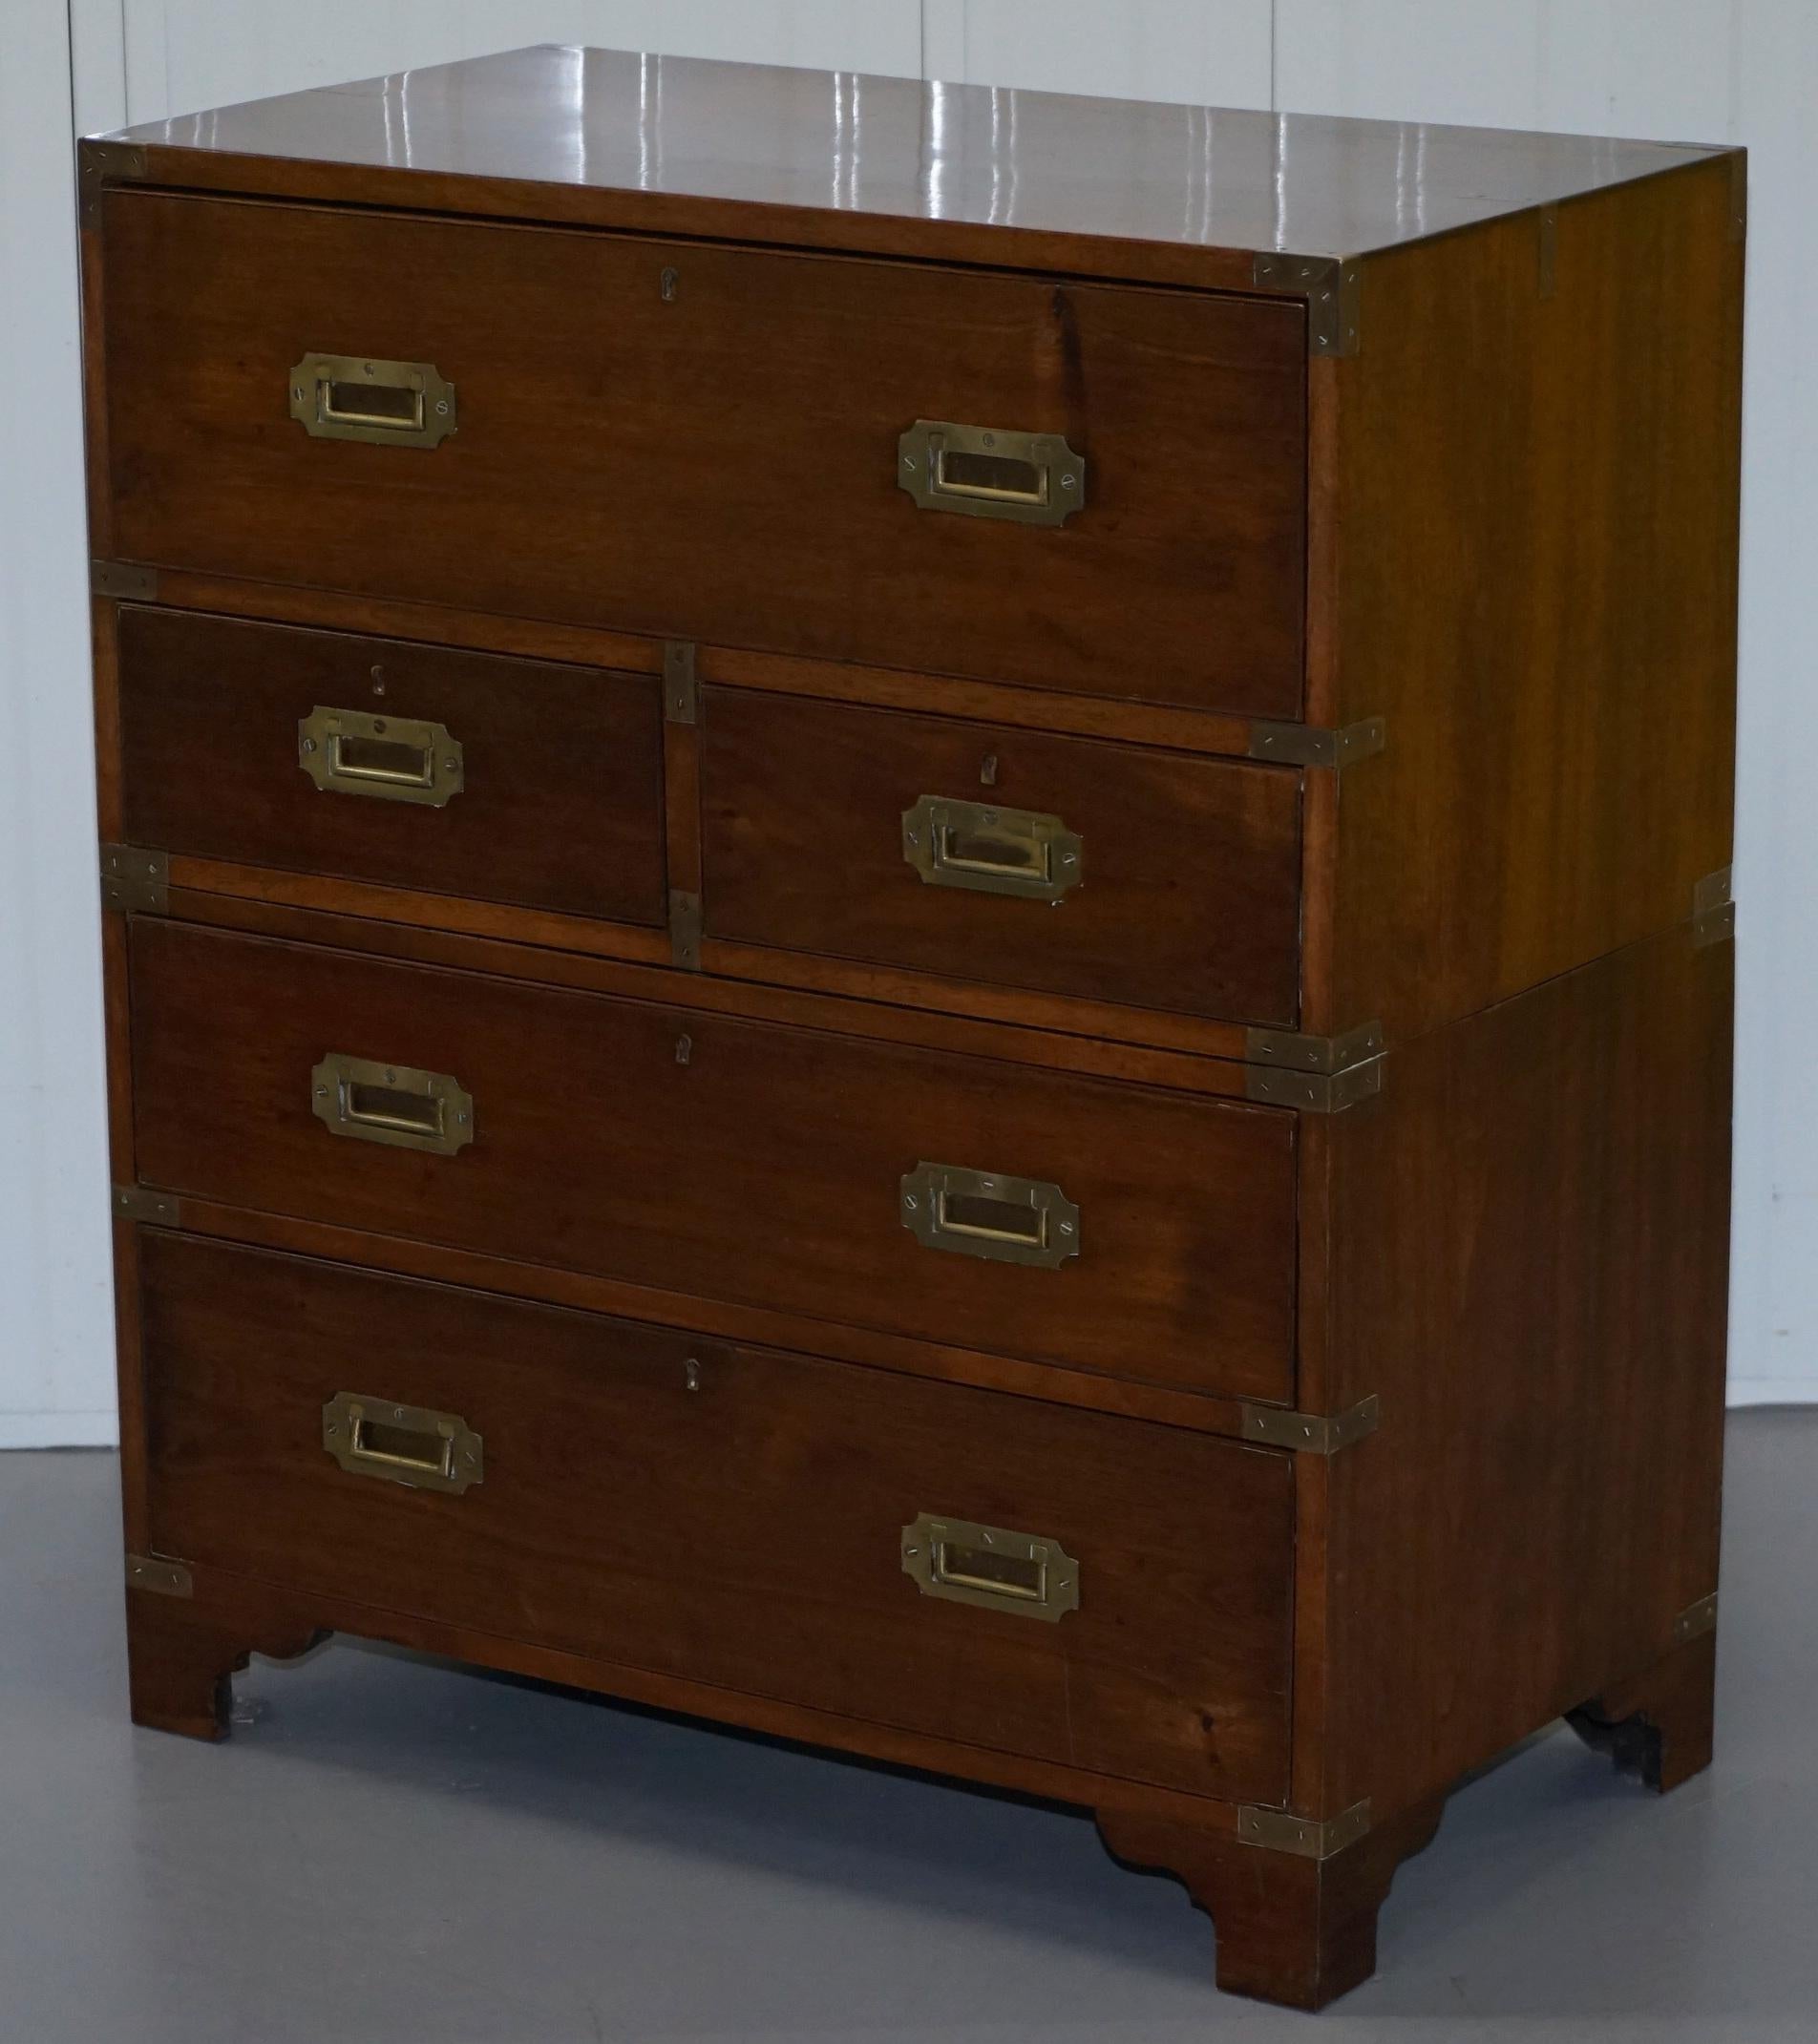 Victorian Military Campaign Chest of Drawers Built in Secrataire Drop Front Desk (Englisch)